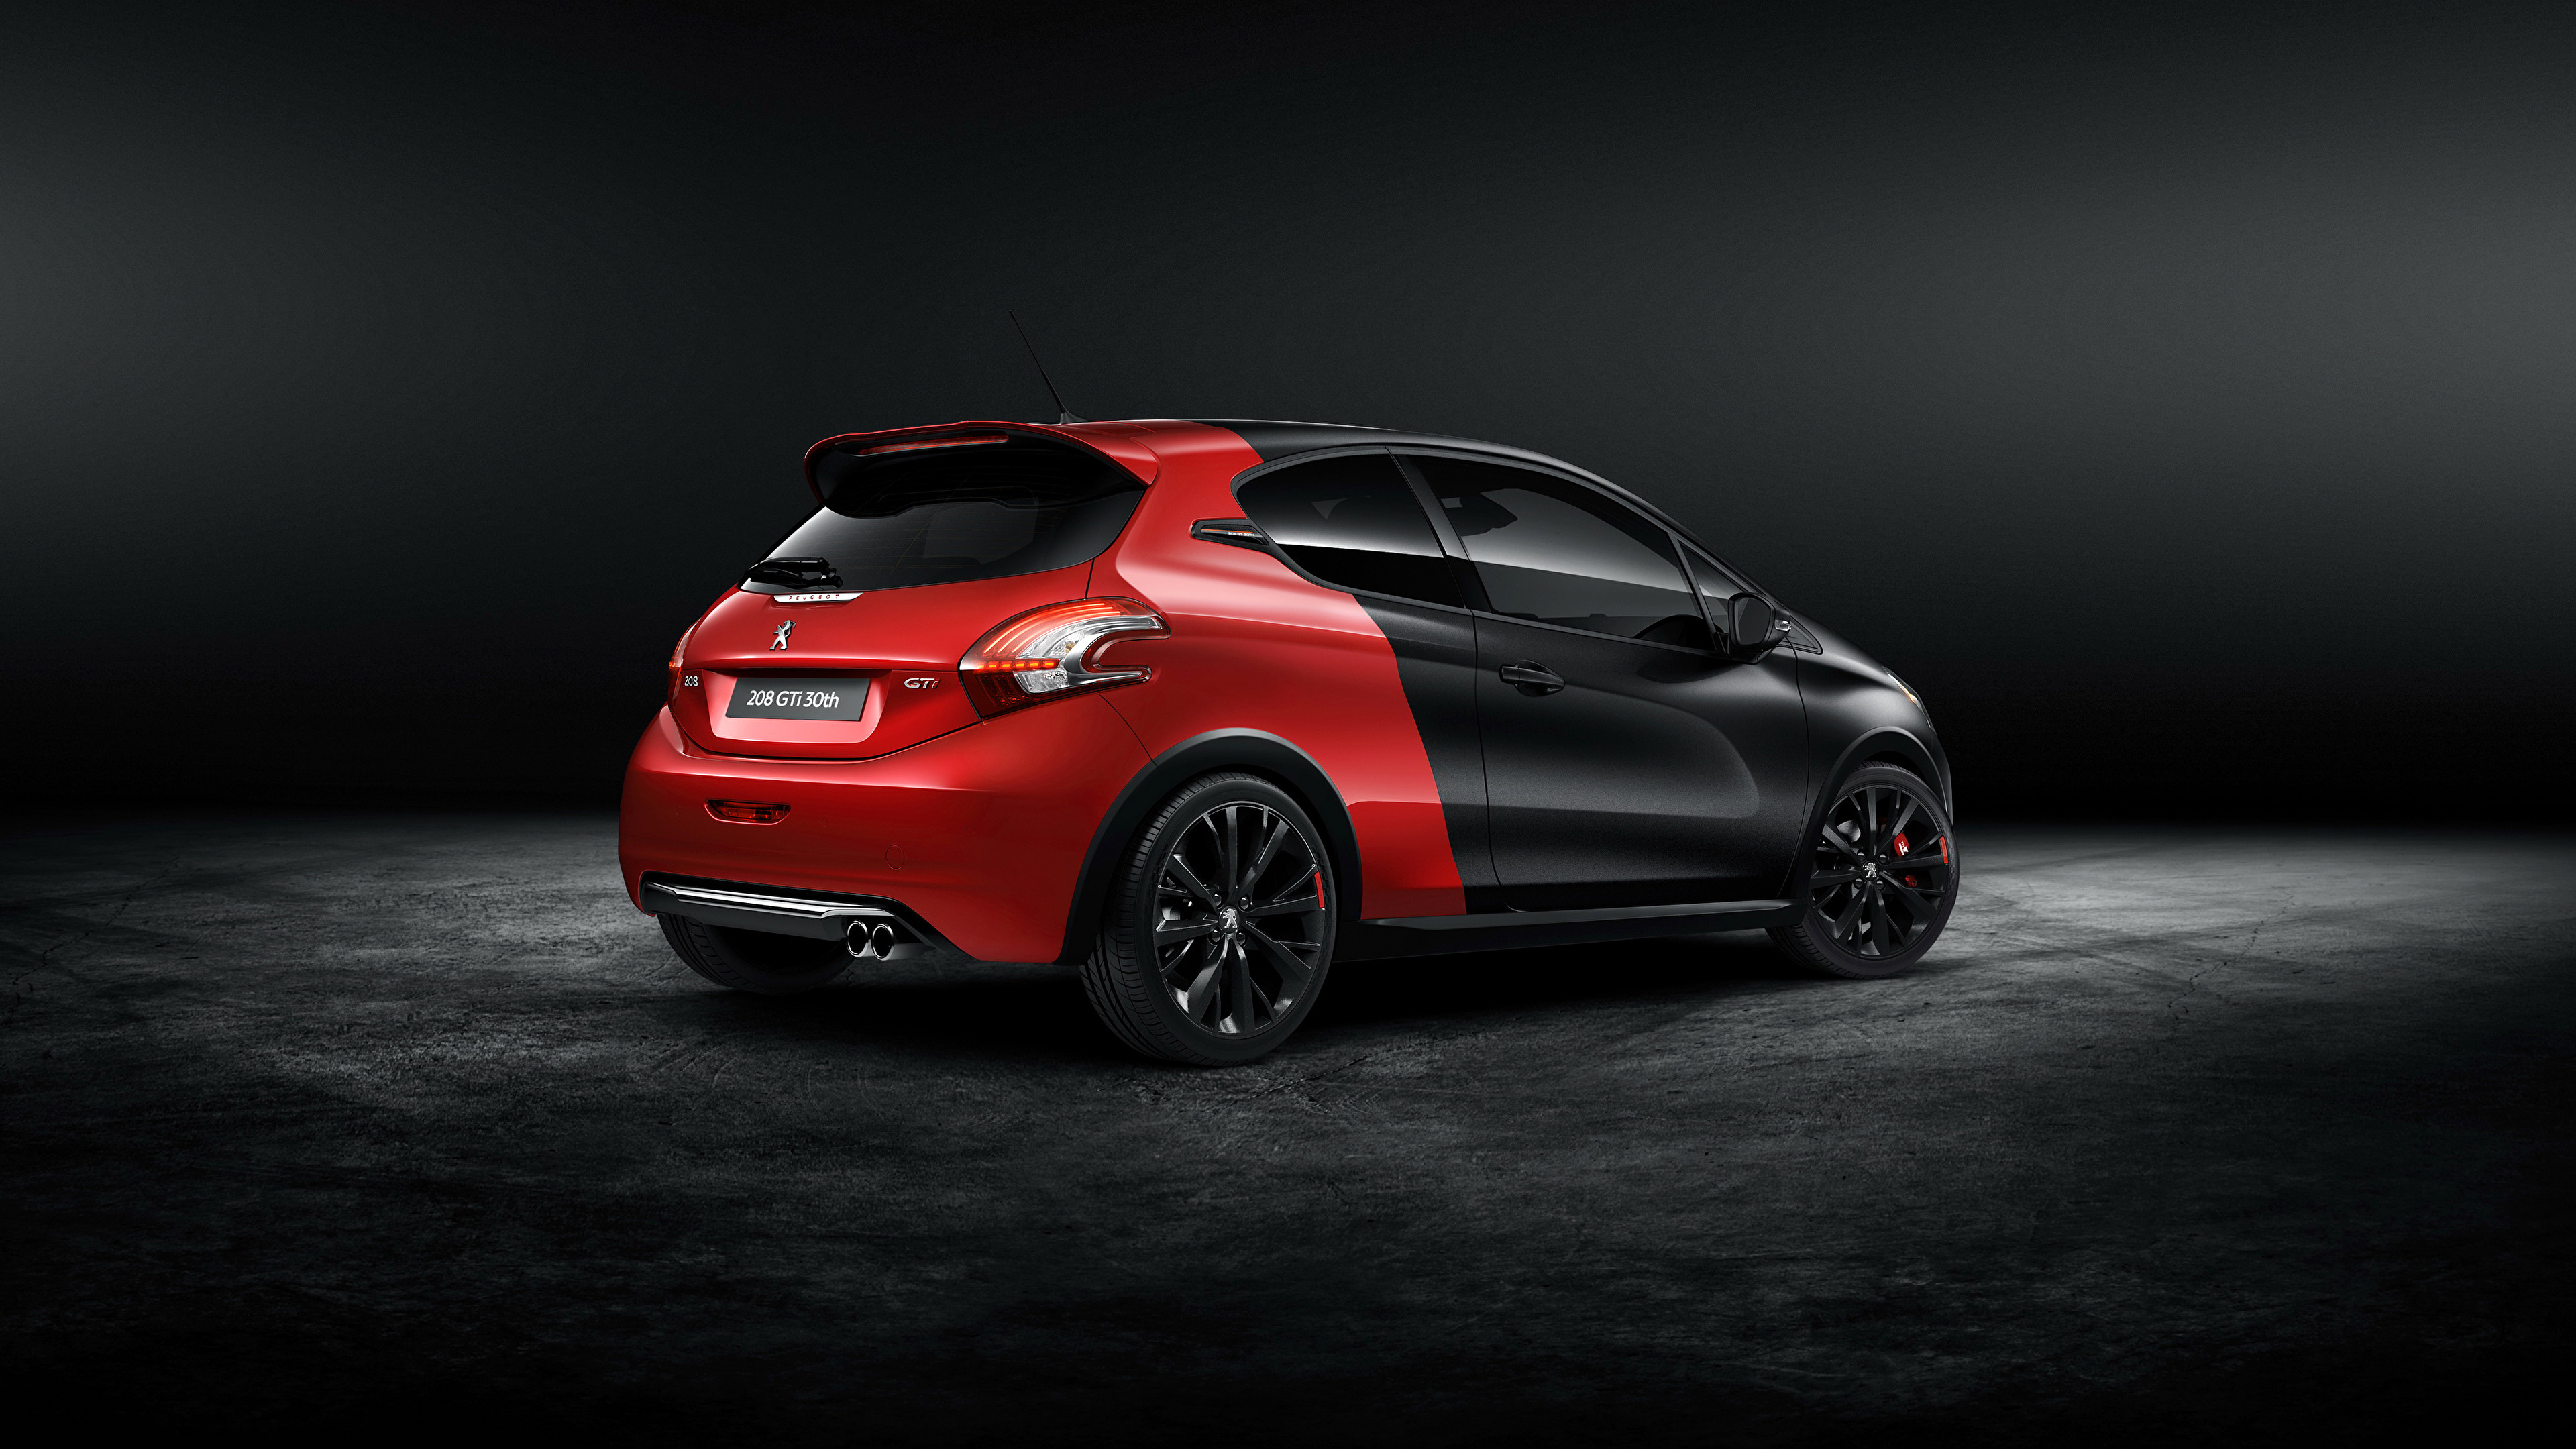 Photos Tuning Peugeot 14 8 Gti 30th Anniversary 3840x2160